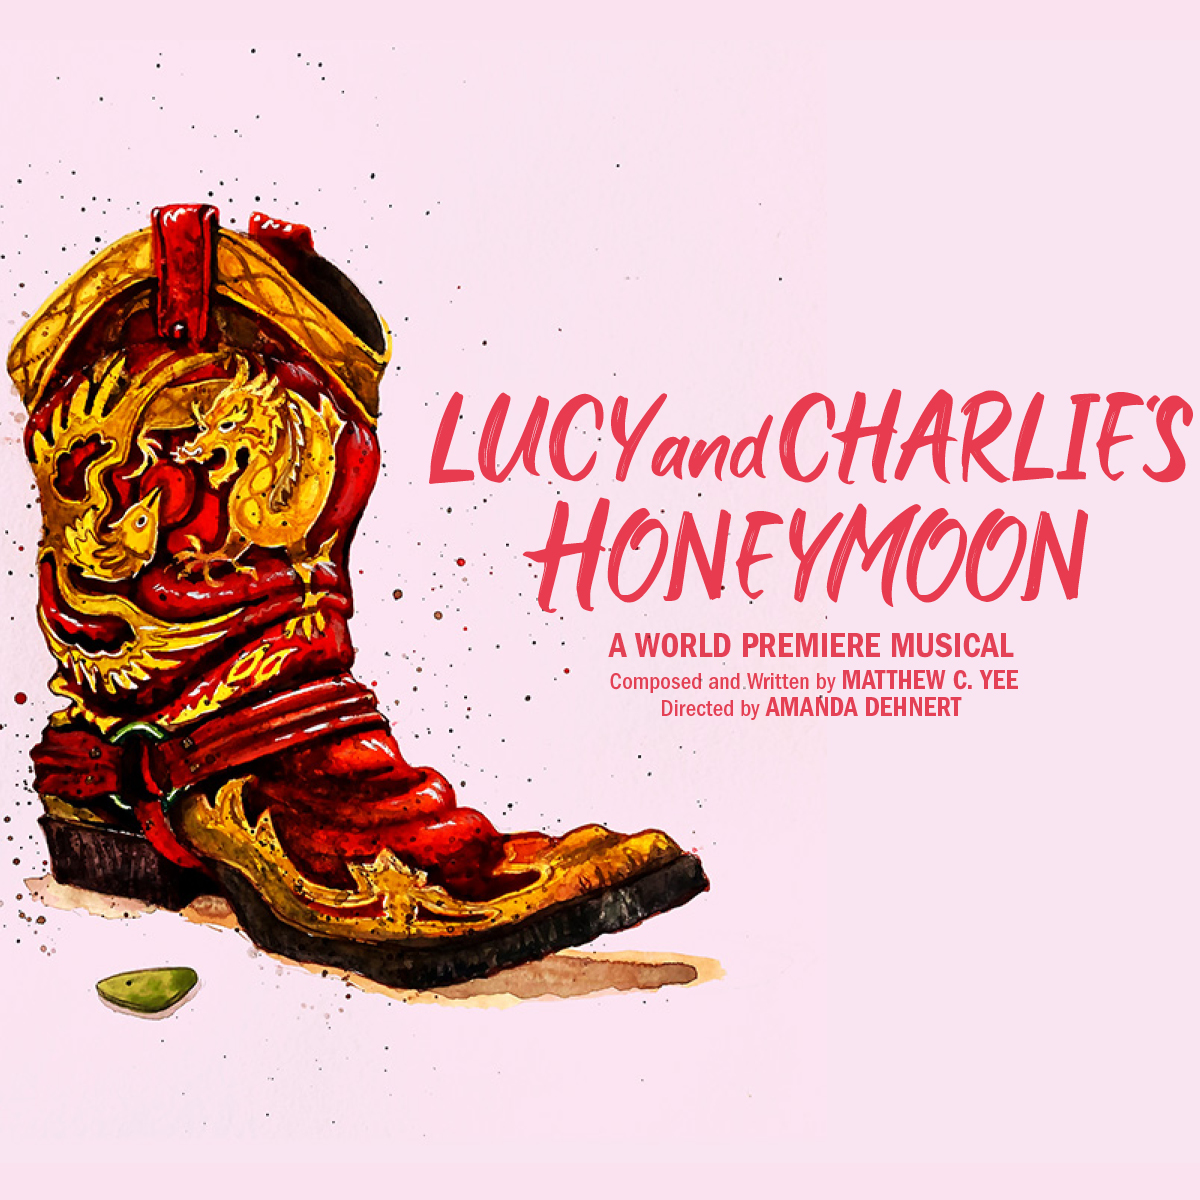 Lucy and Charlie’s Honeymoon. Art by Sully Ratke